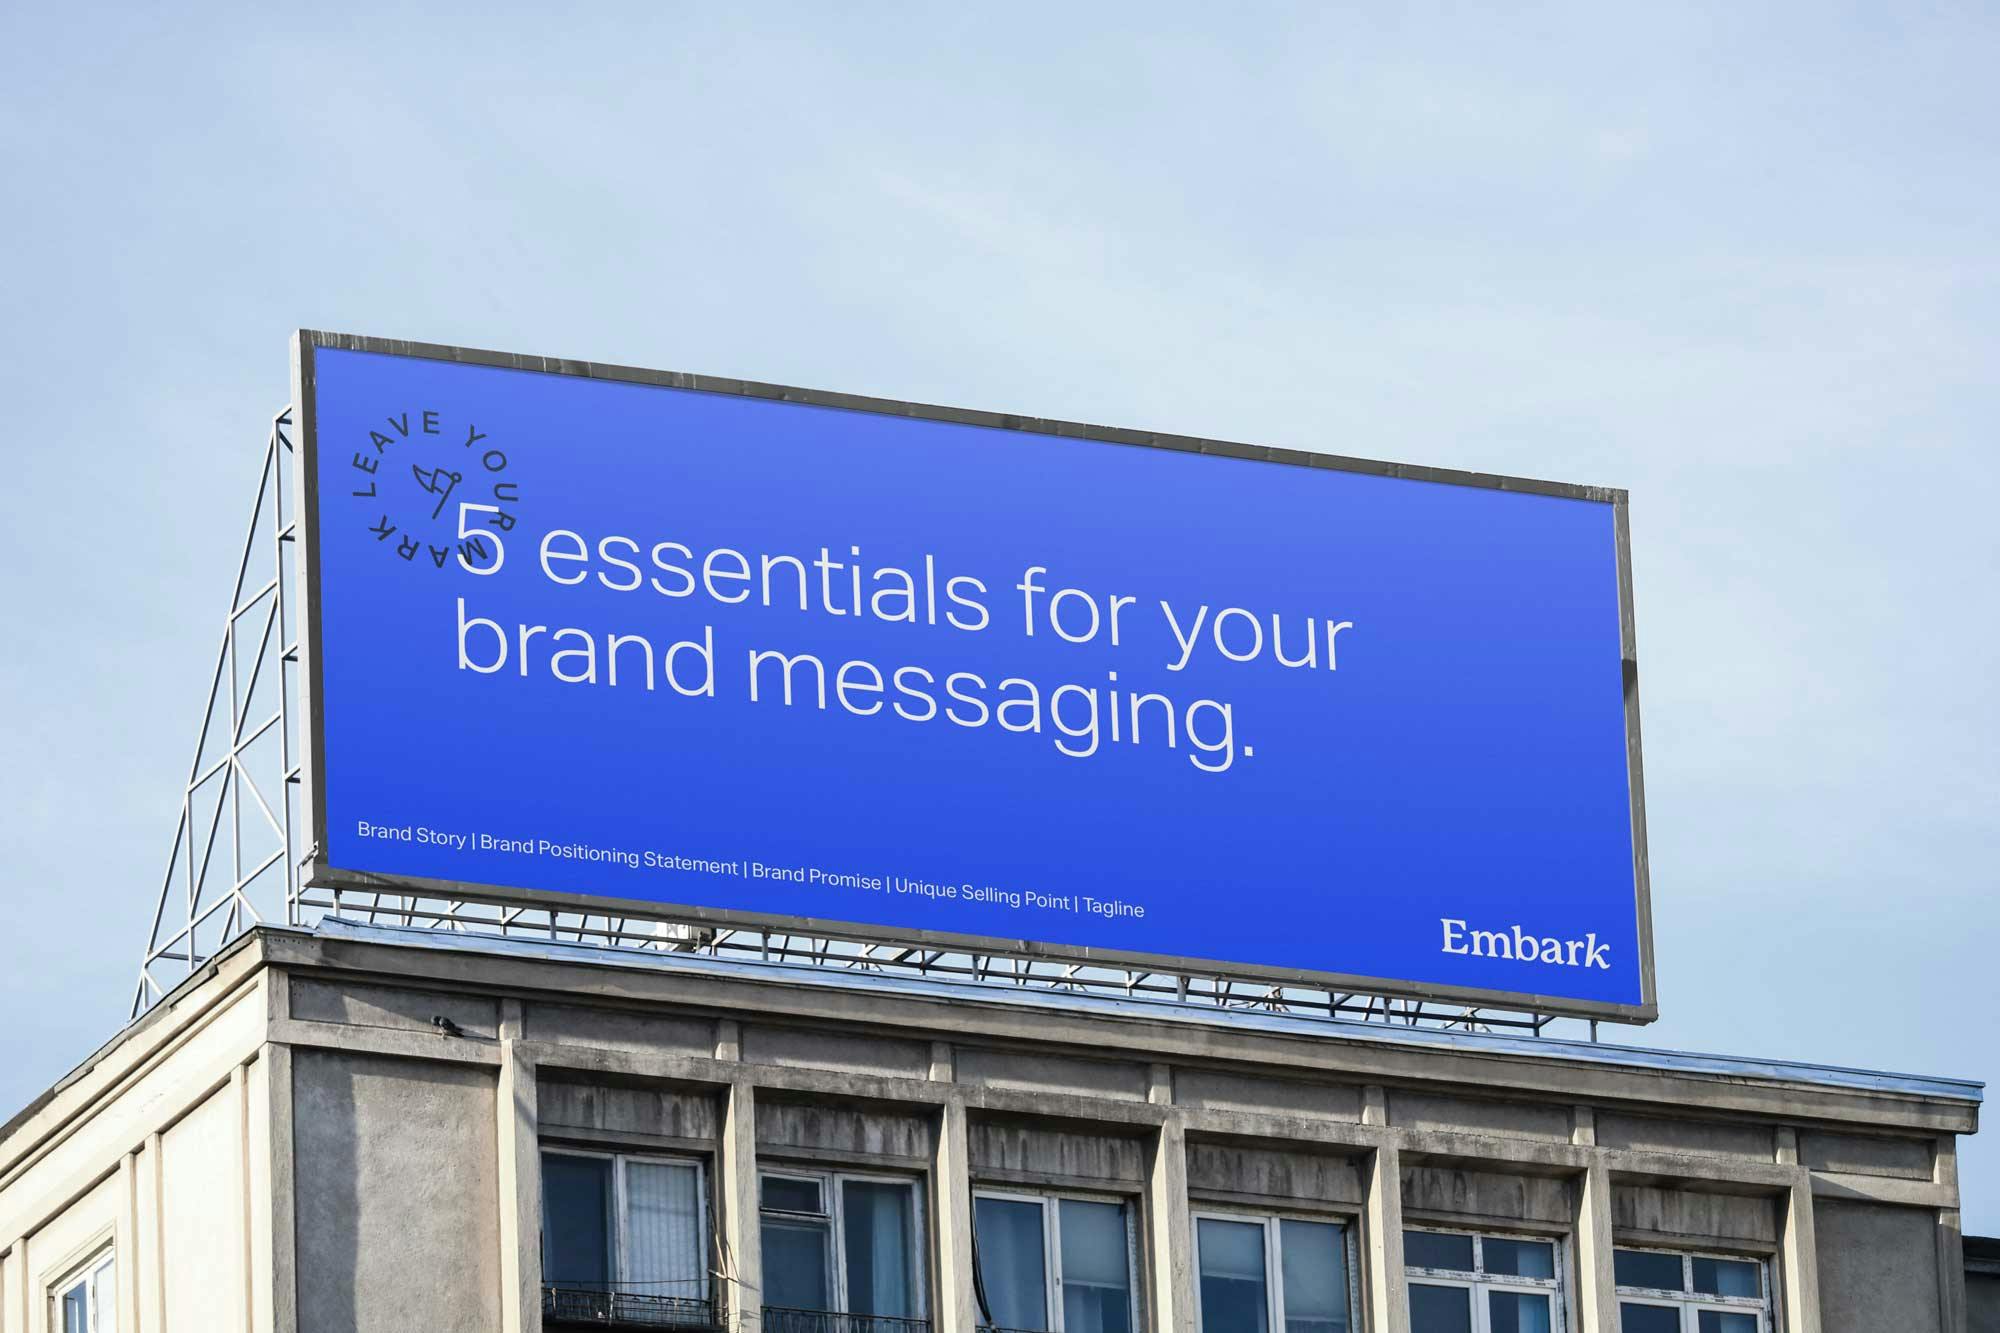 Nail your brand messaging with these 5 essentials Insight